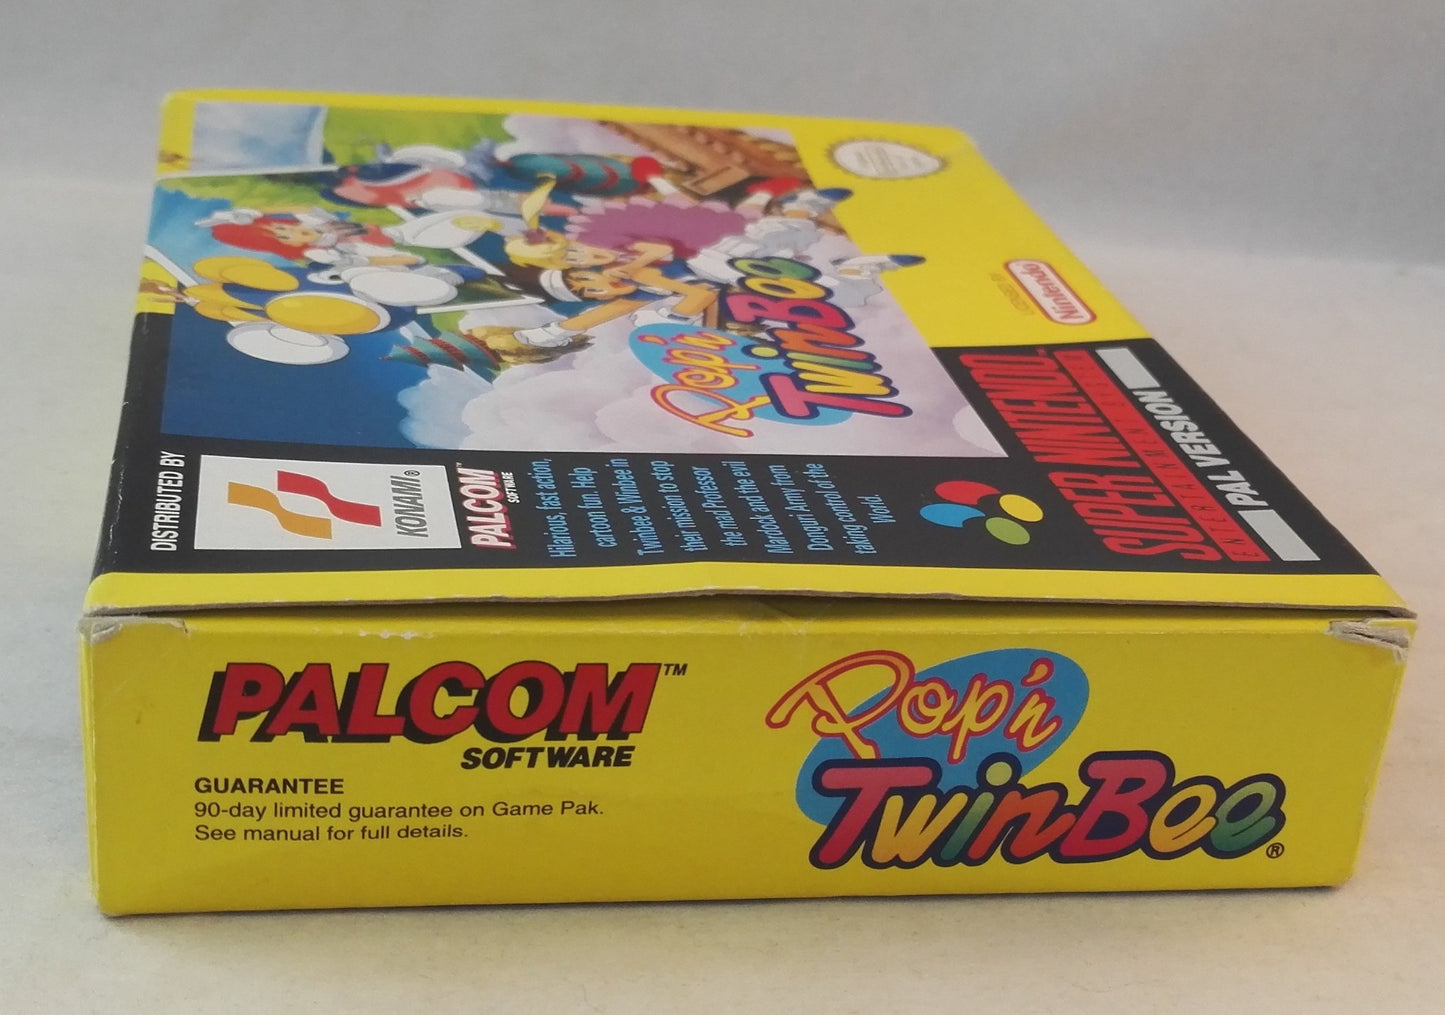 Pop 'n' Twinbee SNES (Super Nintendo Entertainment System) Boxed complete VGC